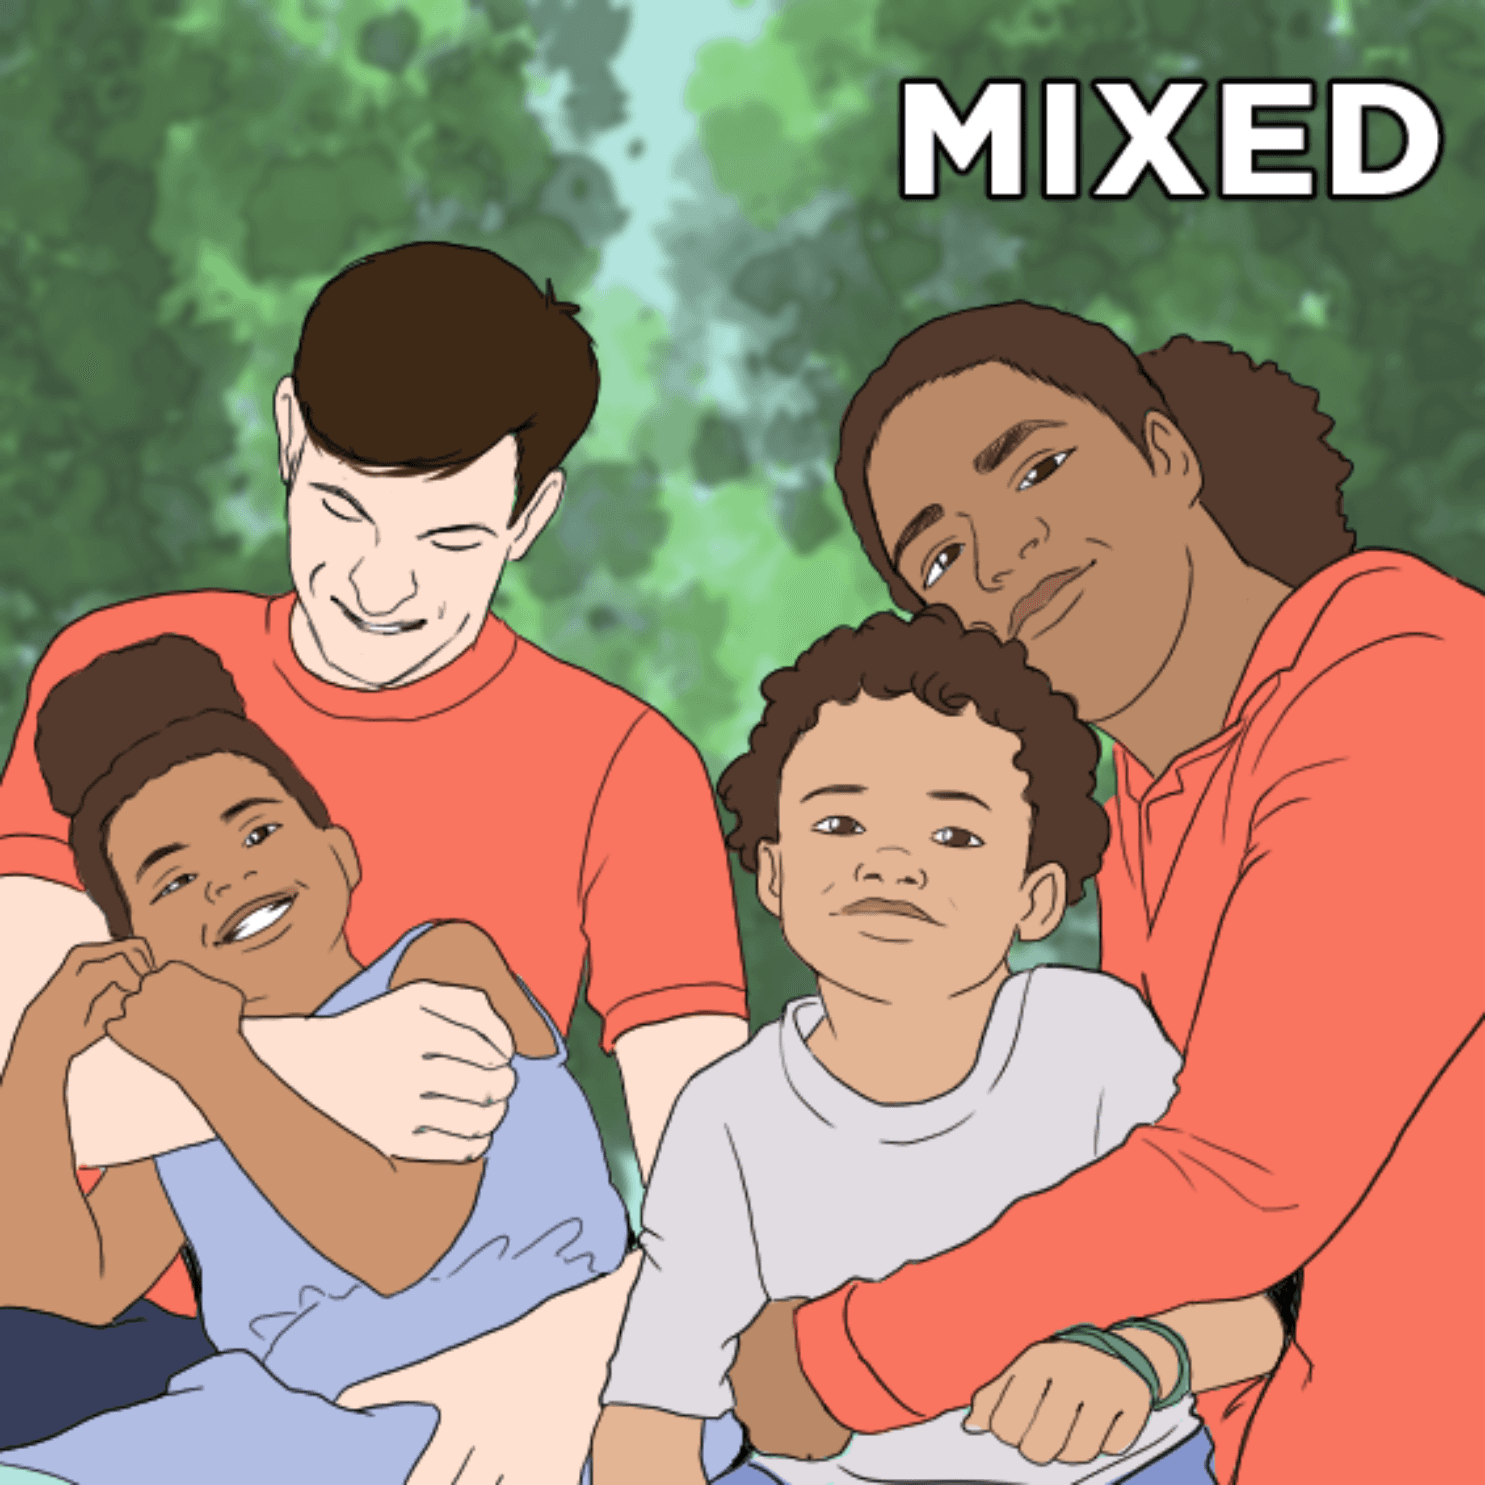 Thumbnail for "Mixed: Owning Your Multiracial Story".